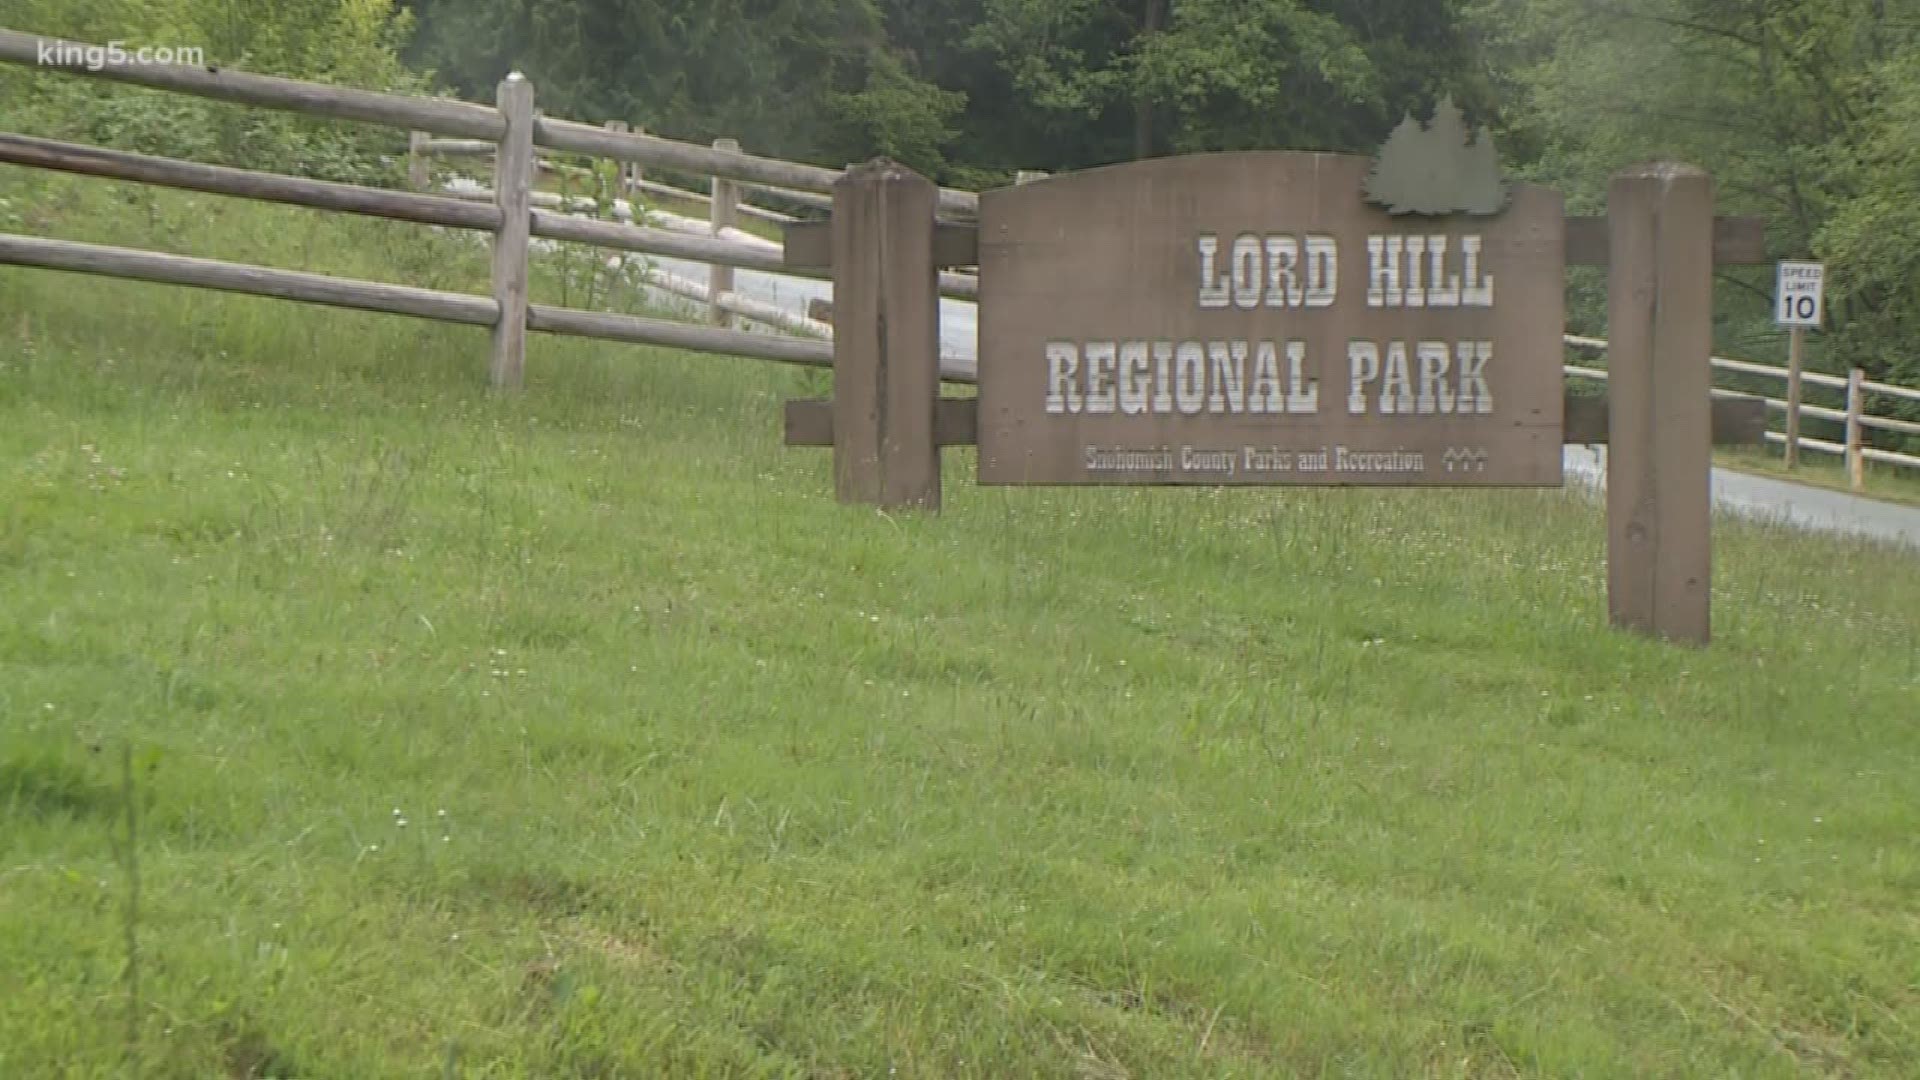 Lord Hill Regional Park in Snohomish County is a popular place to visit for bikers, hikers and horseback riders.  But all of those visitors go at a different pace and the park's 33 trials need to be designated as safe for each group.